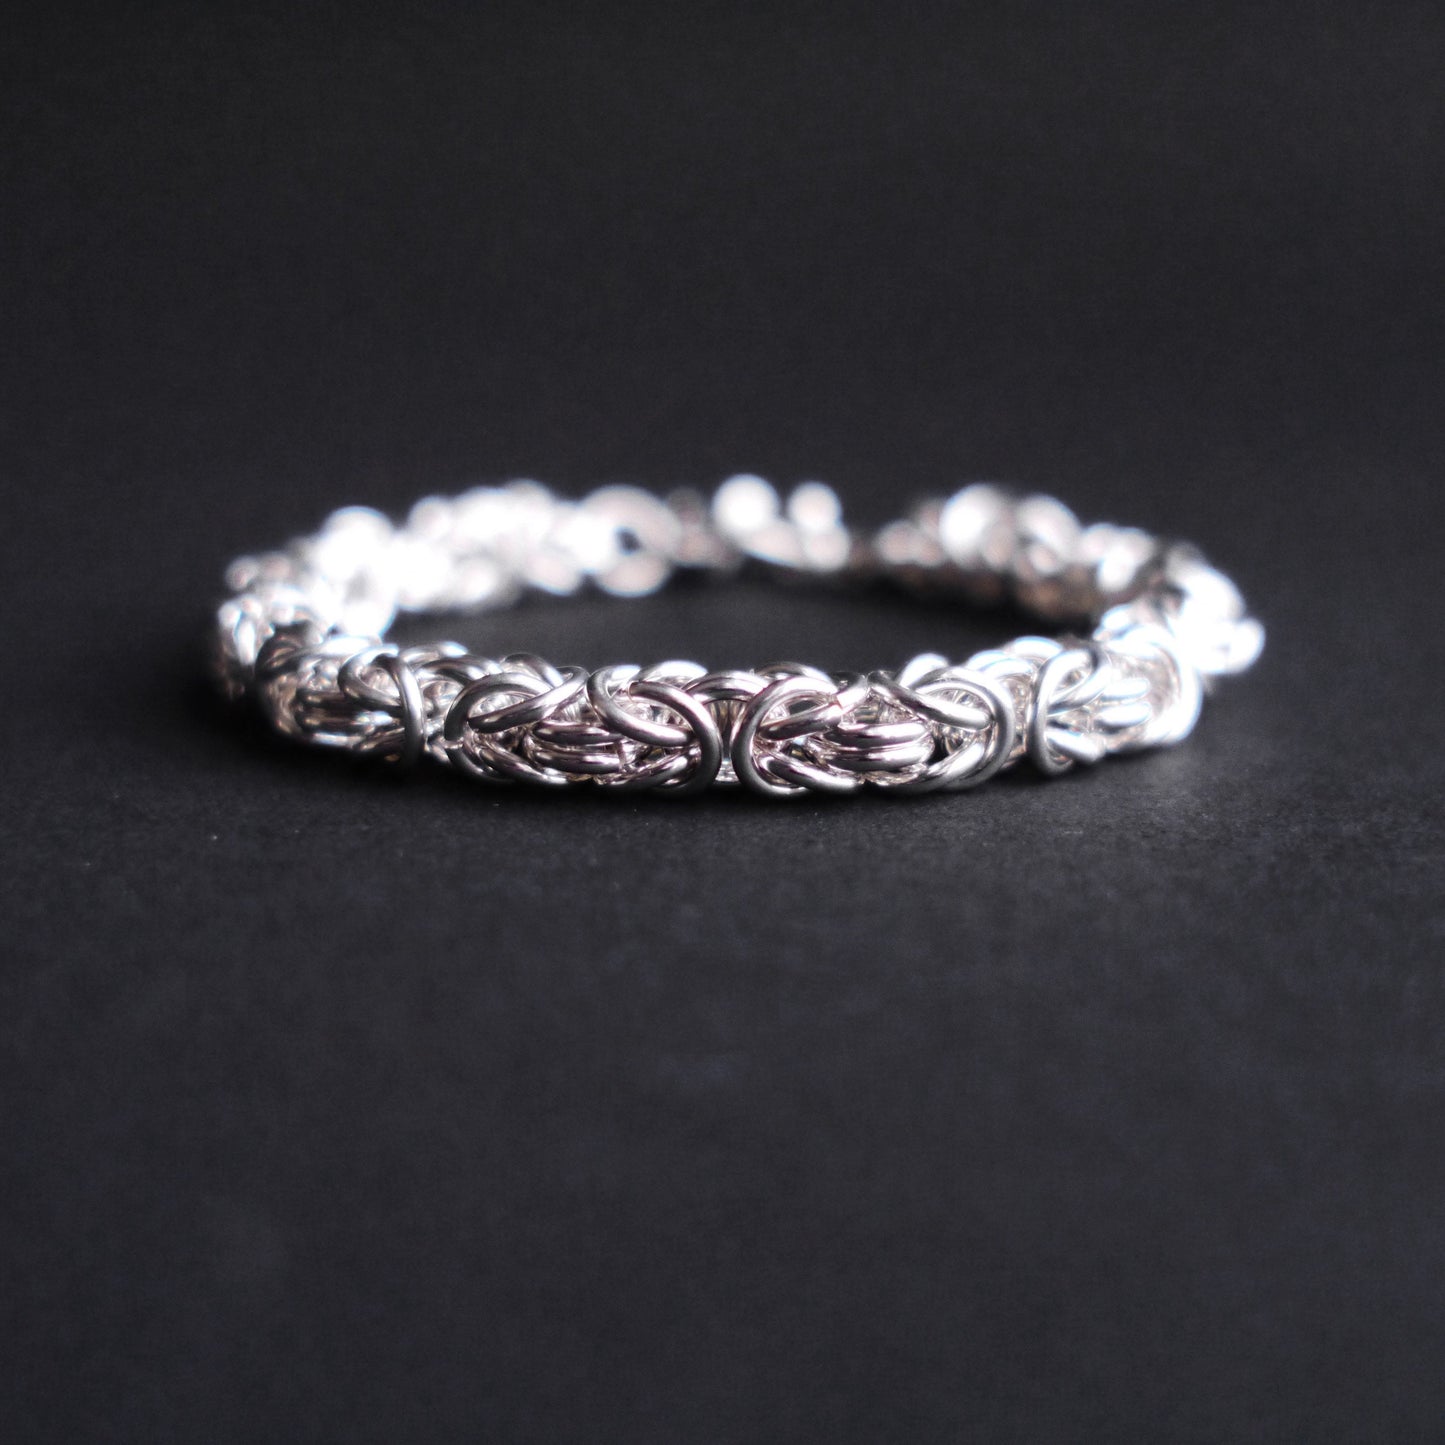 7mm Byzantine Chainmaille Bracelet in Sterling Silver